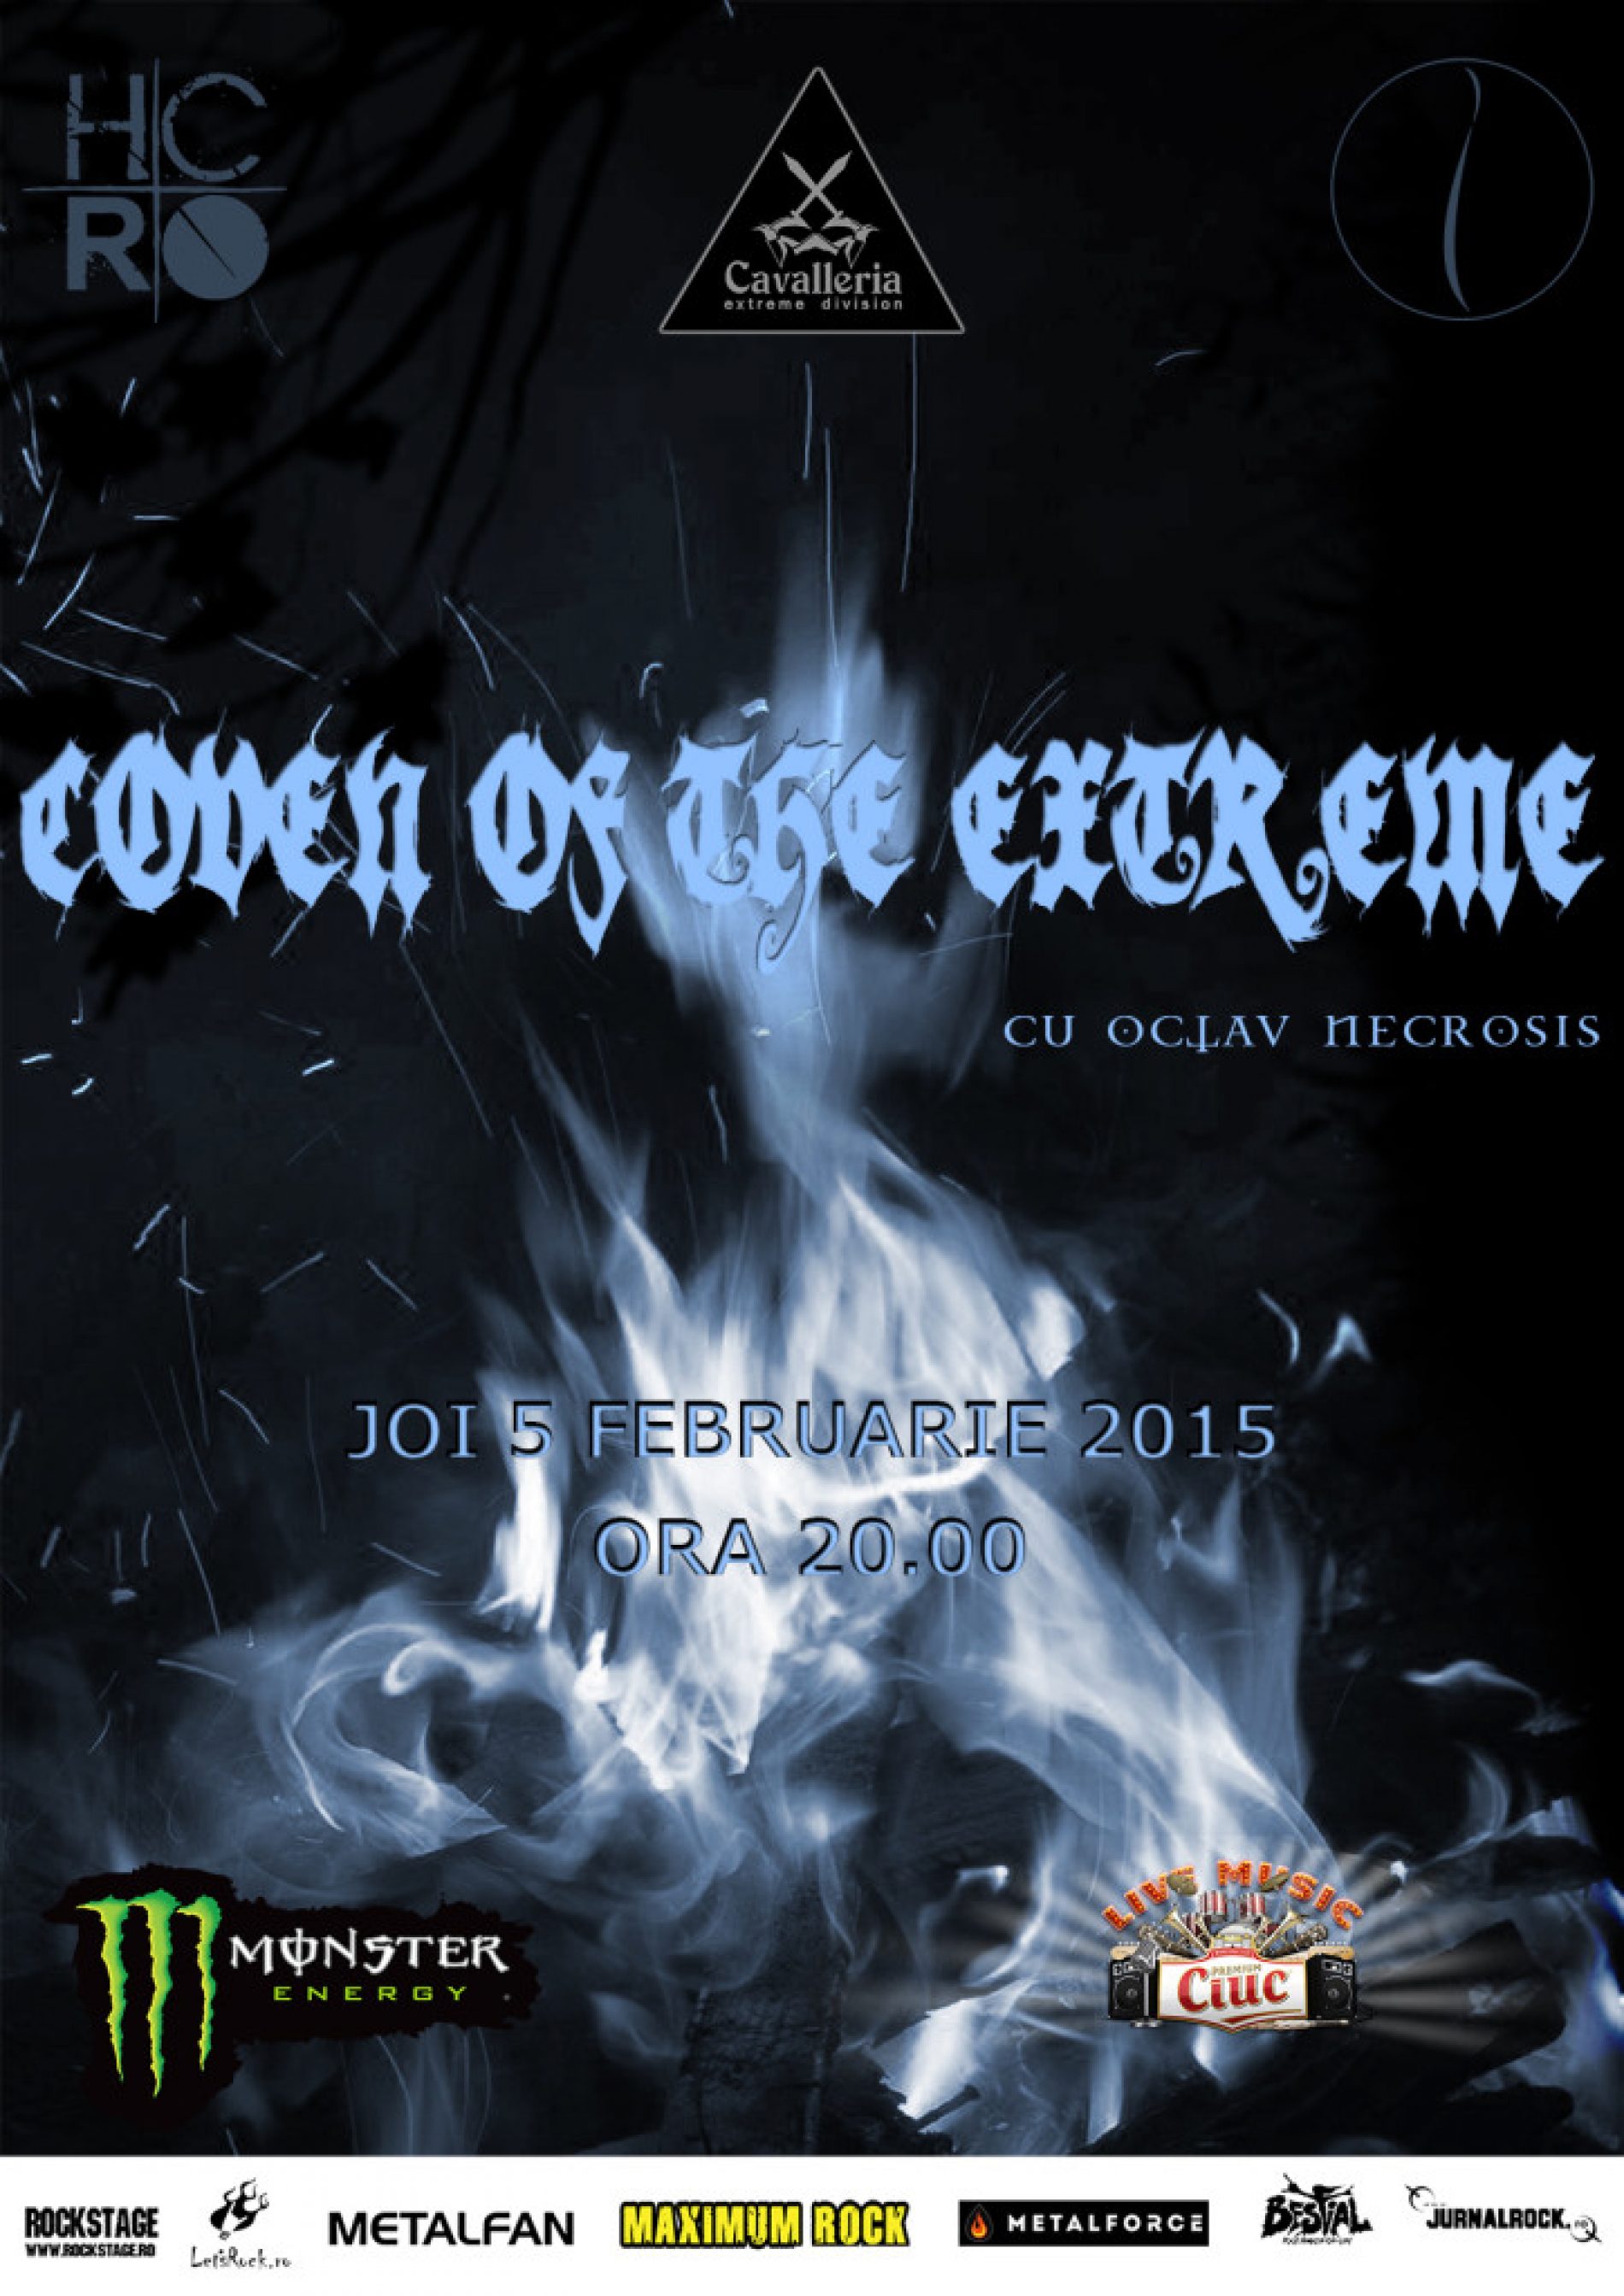 Concert Coven of the Extreme cu Octav Necrosis in Question Mark